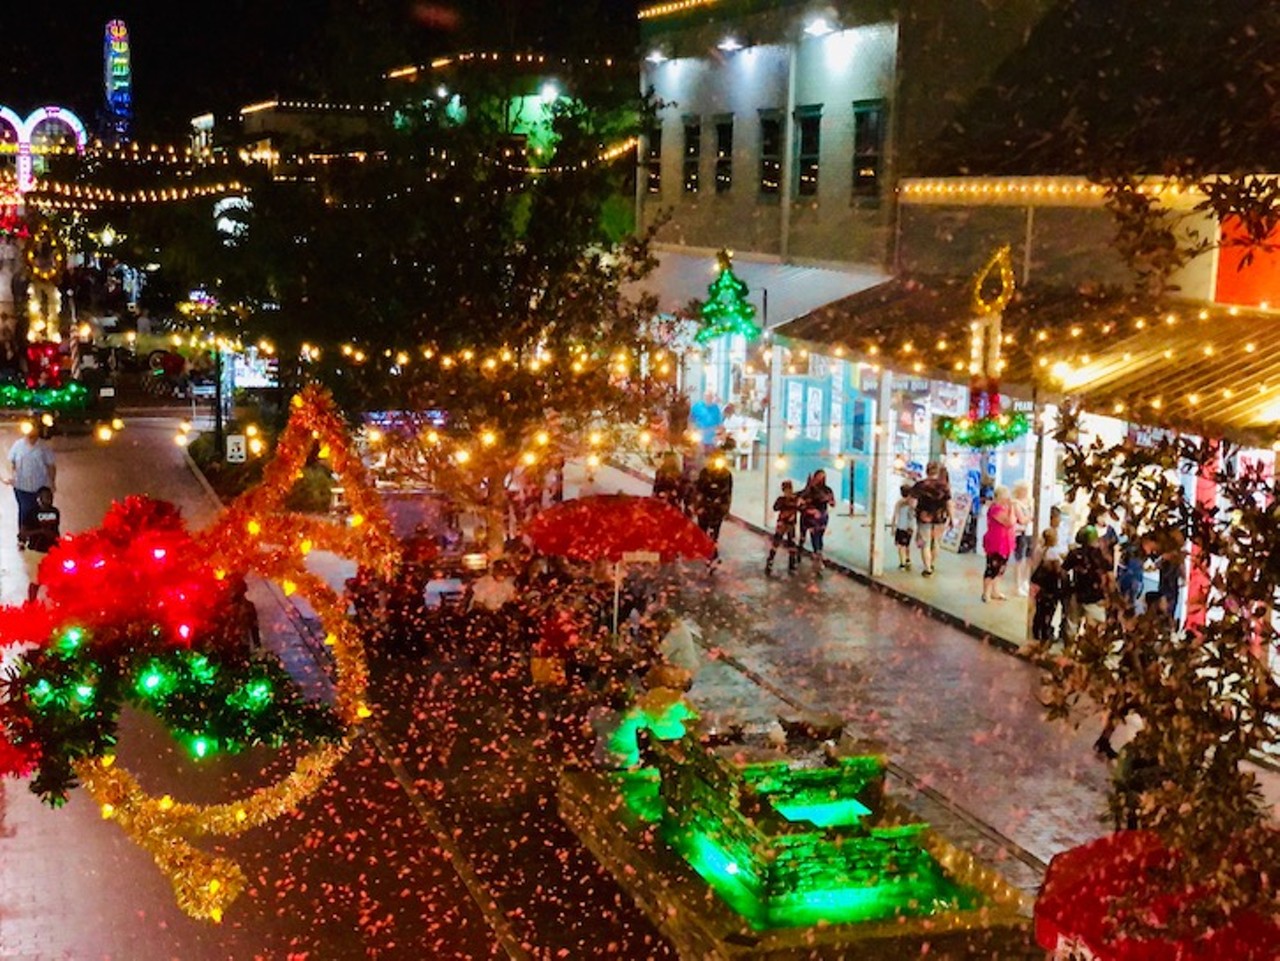 Holidays at Old Town  
Old Town, 5770 West Irlo Bronson Memorial Hwy, Kissimmee, 407-396-4888
The Kissimmee entertainment complex once again raises its iconic Christmas tree, and its brick streets will be coated in &#147;snow&#148; every weekend. A holiday bazaar will be held on Dec. 7, with a bike toy run on the 8th and a golf cart parade on the 14th
Photo via Old Town/Website